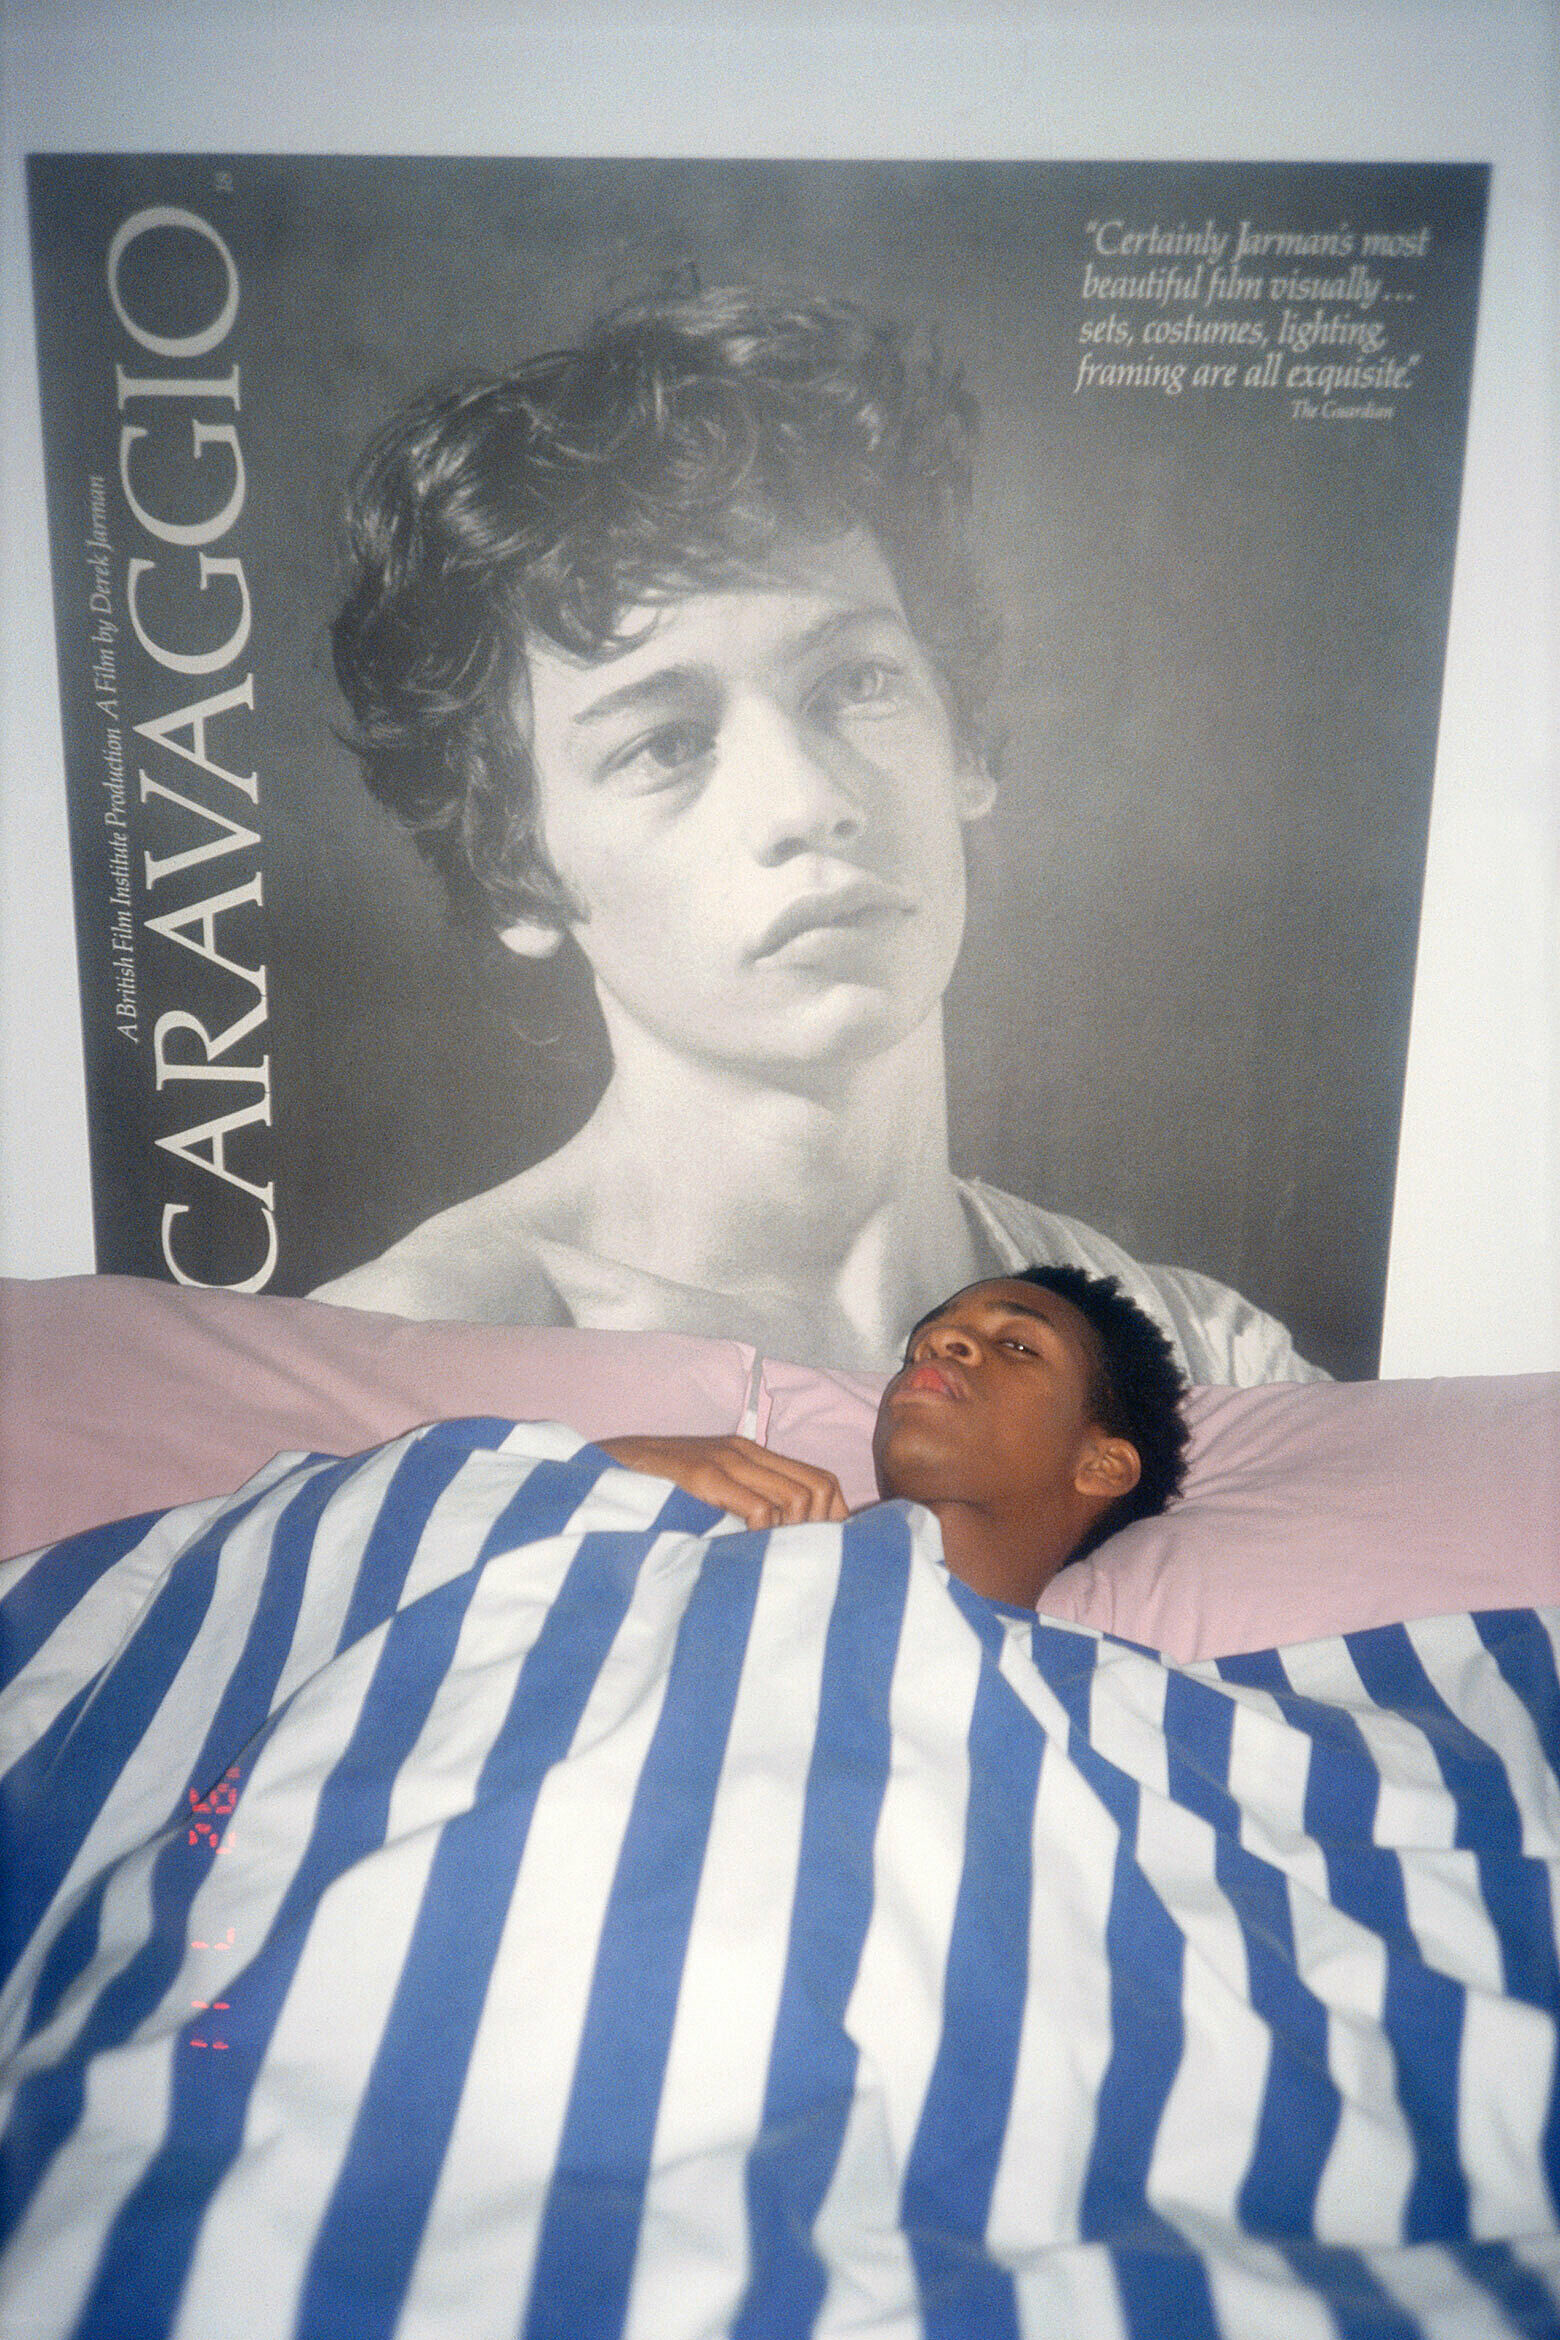 Photograph of Harris in bed with Caravaggio poster in background